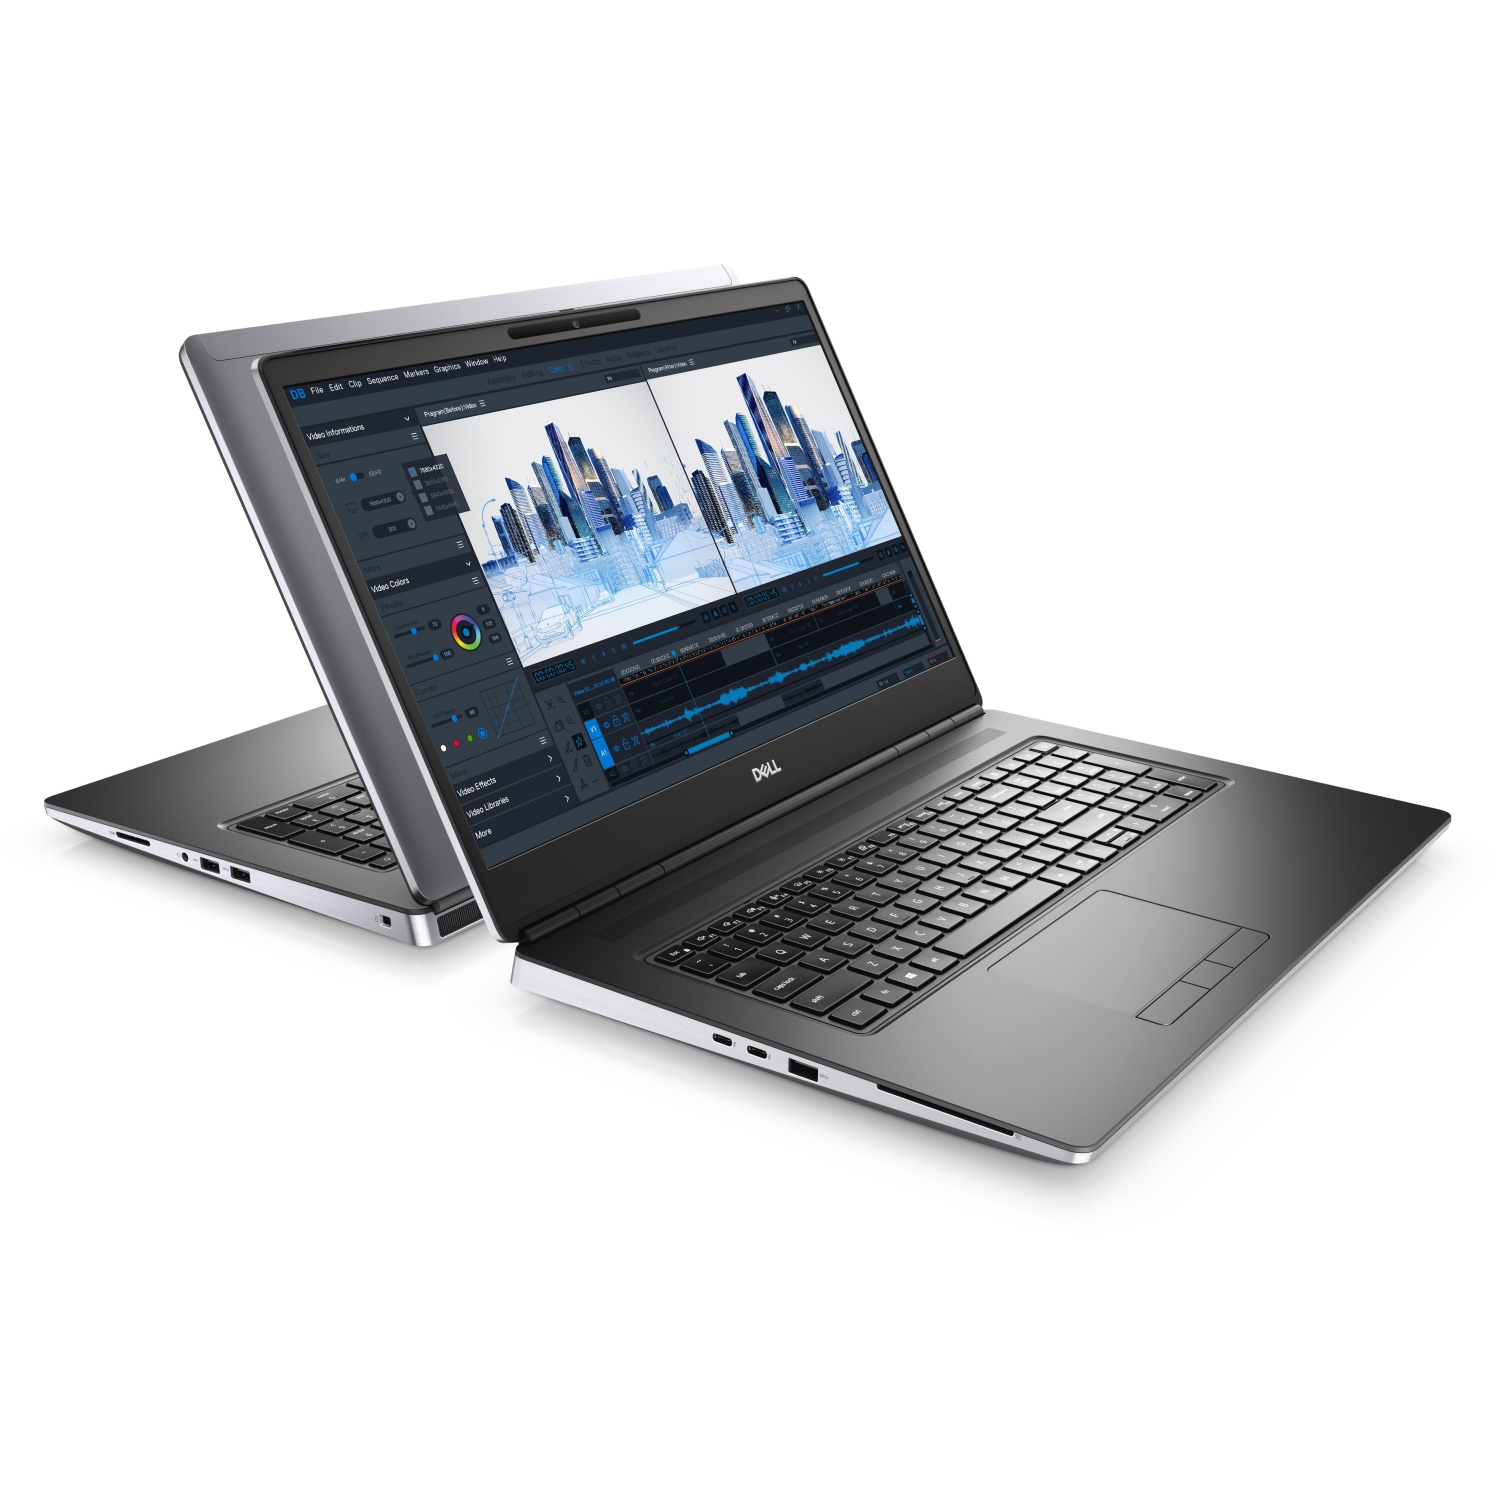 Refurbished (Excellent) - Dell Precision 7000 7760 Workstation Laptop (2021), 17.3" FHD, Core i7, 1TB SSD + 512GB SSD, 64GB RAM, RTX A4000, 4.8 GHz, 11th Gen CPU